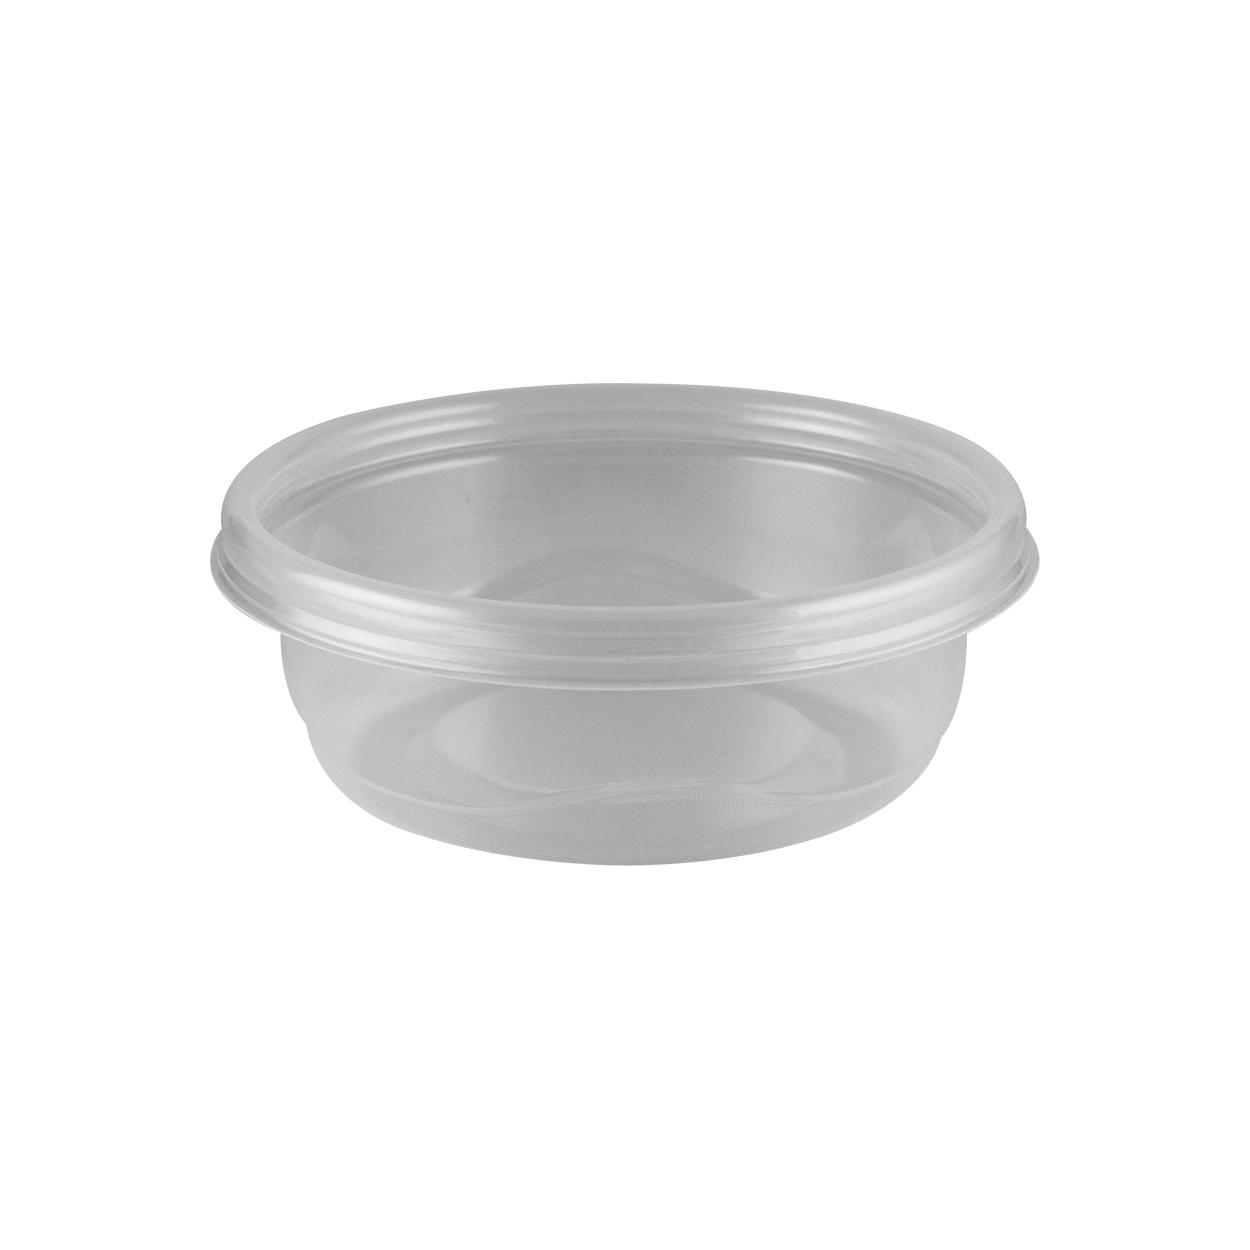 14 Meal Prep Containers Round 16oz. Reusable, Microwavable